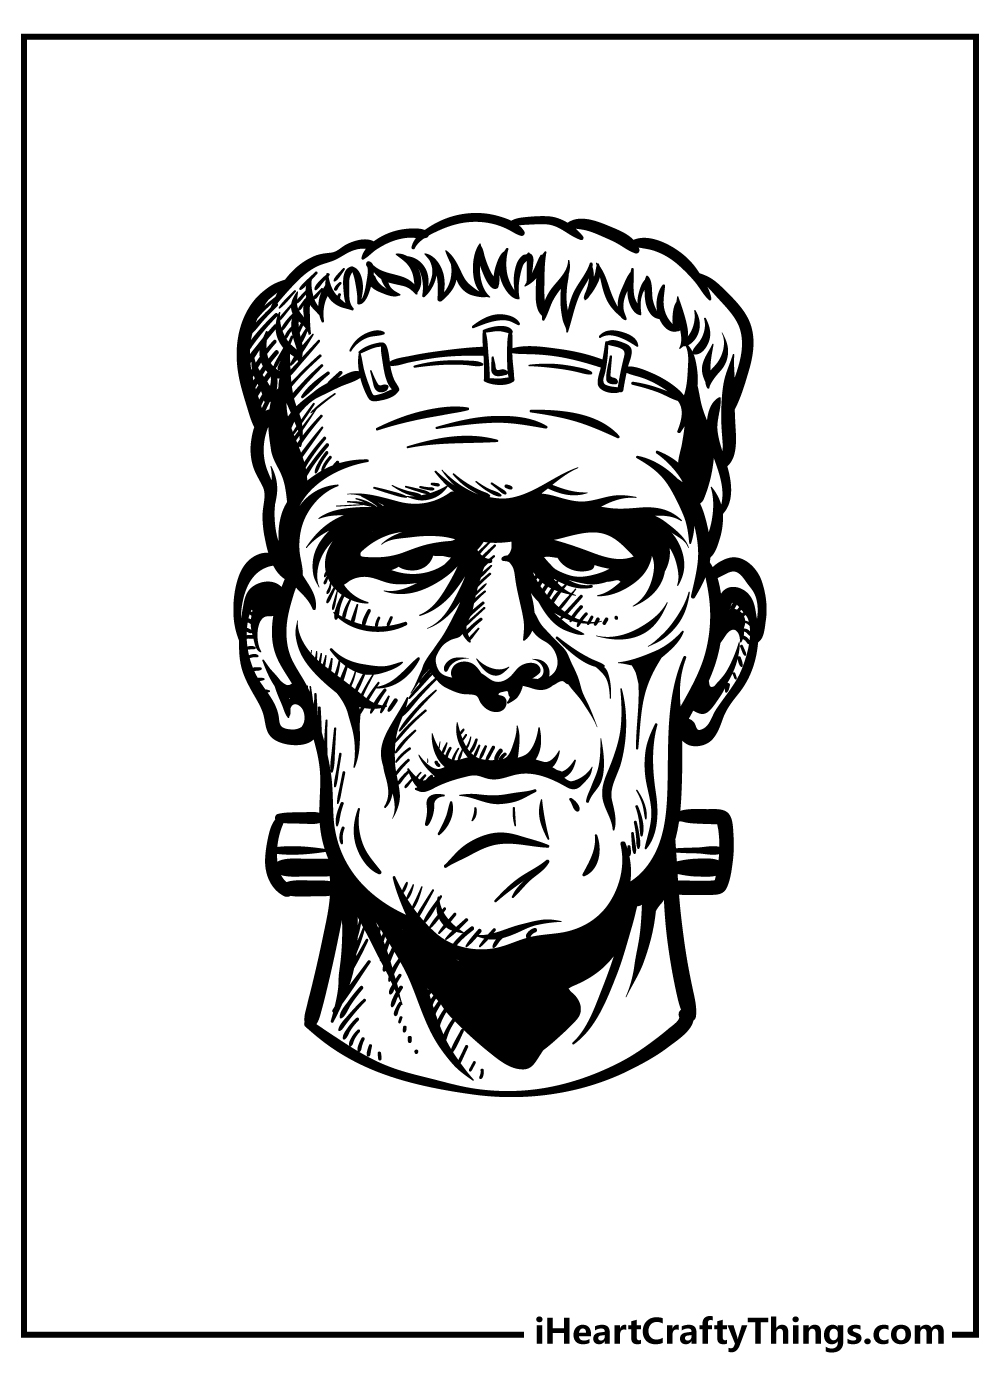 Frankenstein Coloring Pages for kids free download